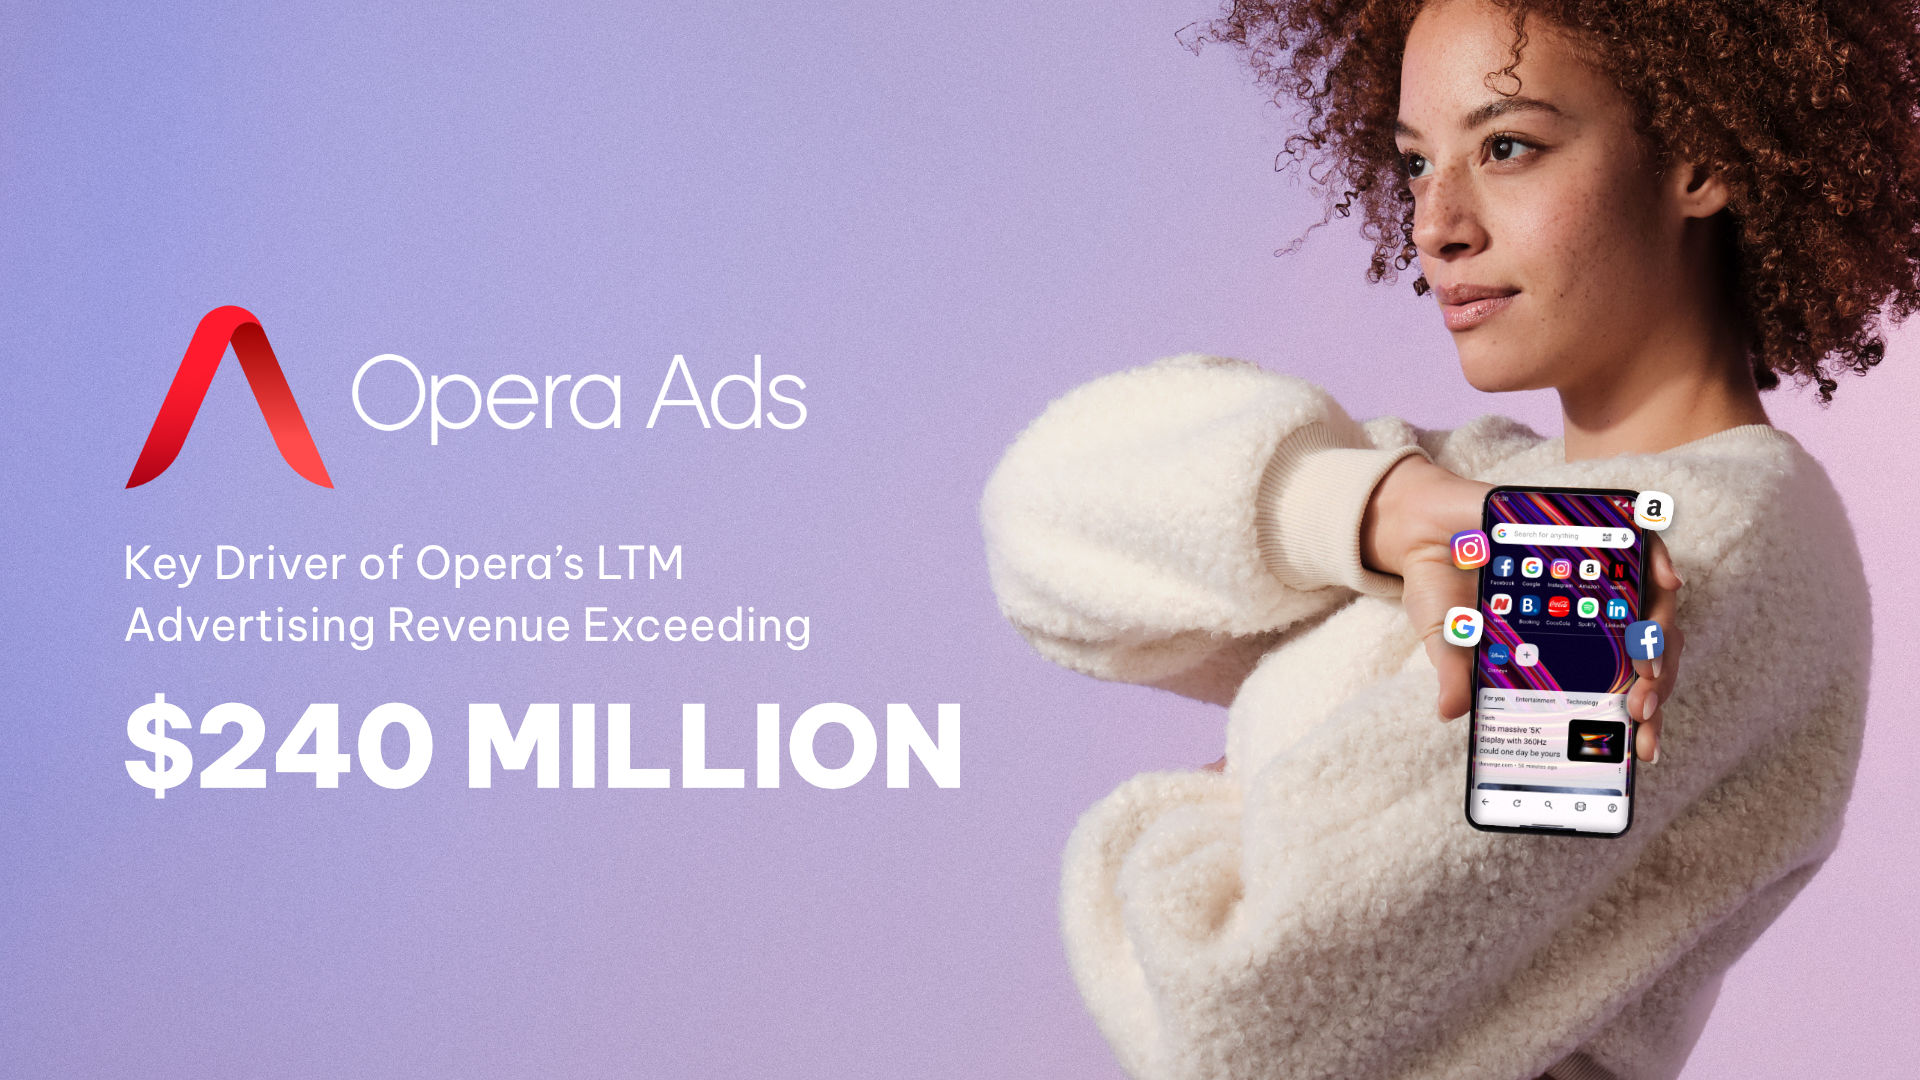 Opera Ads Celebrates Five Years of Innovation and Growth, Key Driver of Opera’s LTM Advertising Revenue Exceeding $240 Million